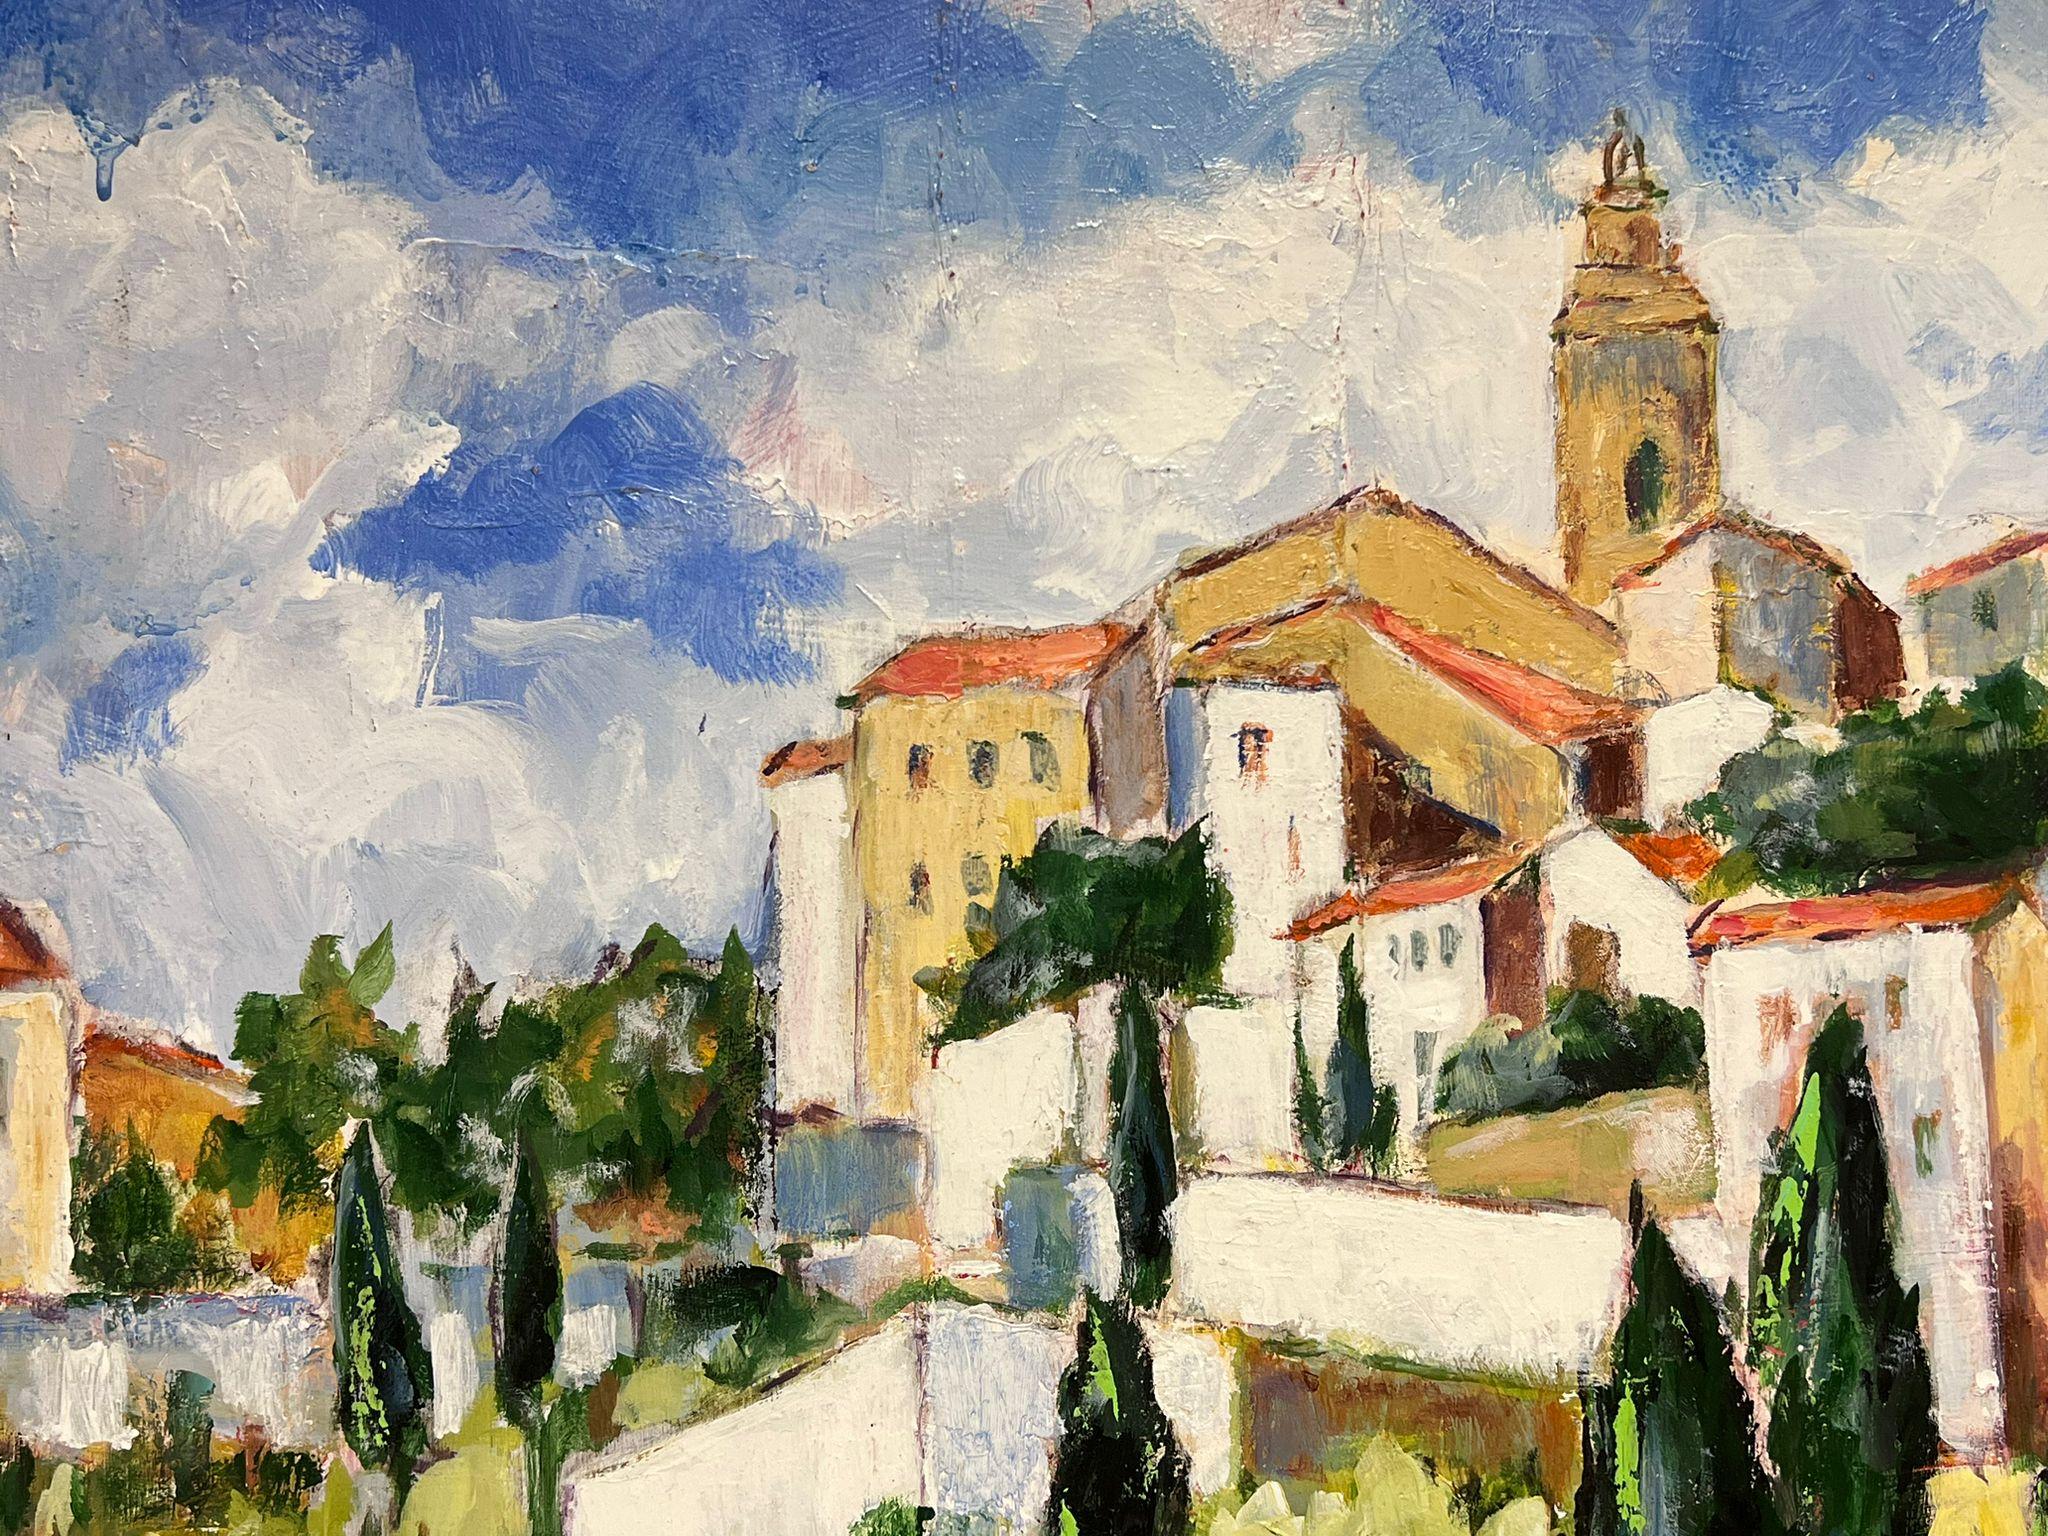 Gordes, Provence
signed oil painting on board, framed
inscribed verso and dated 2005
framed: 28 x 37 inches
provenance: private collection, Provence
condition: very good and sound condition